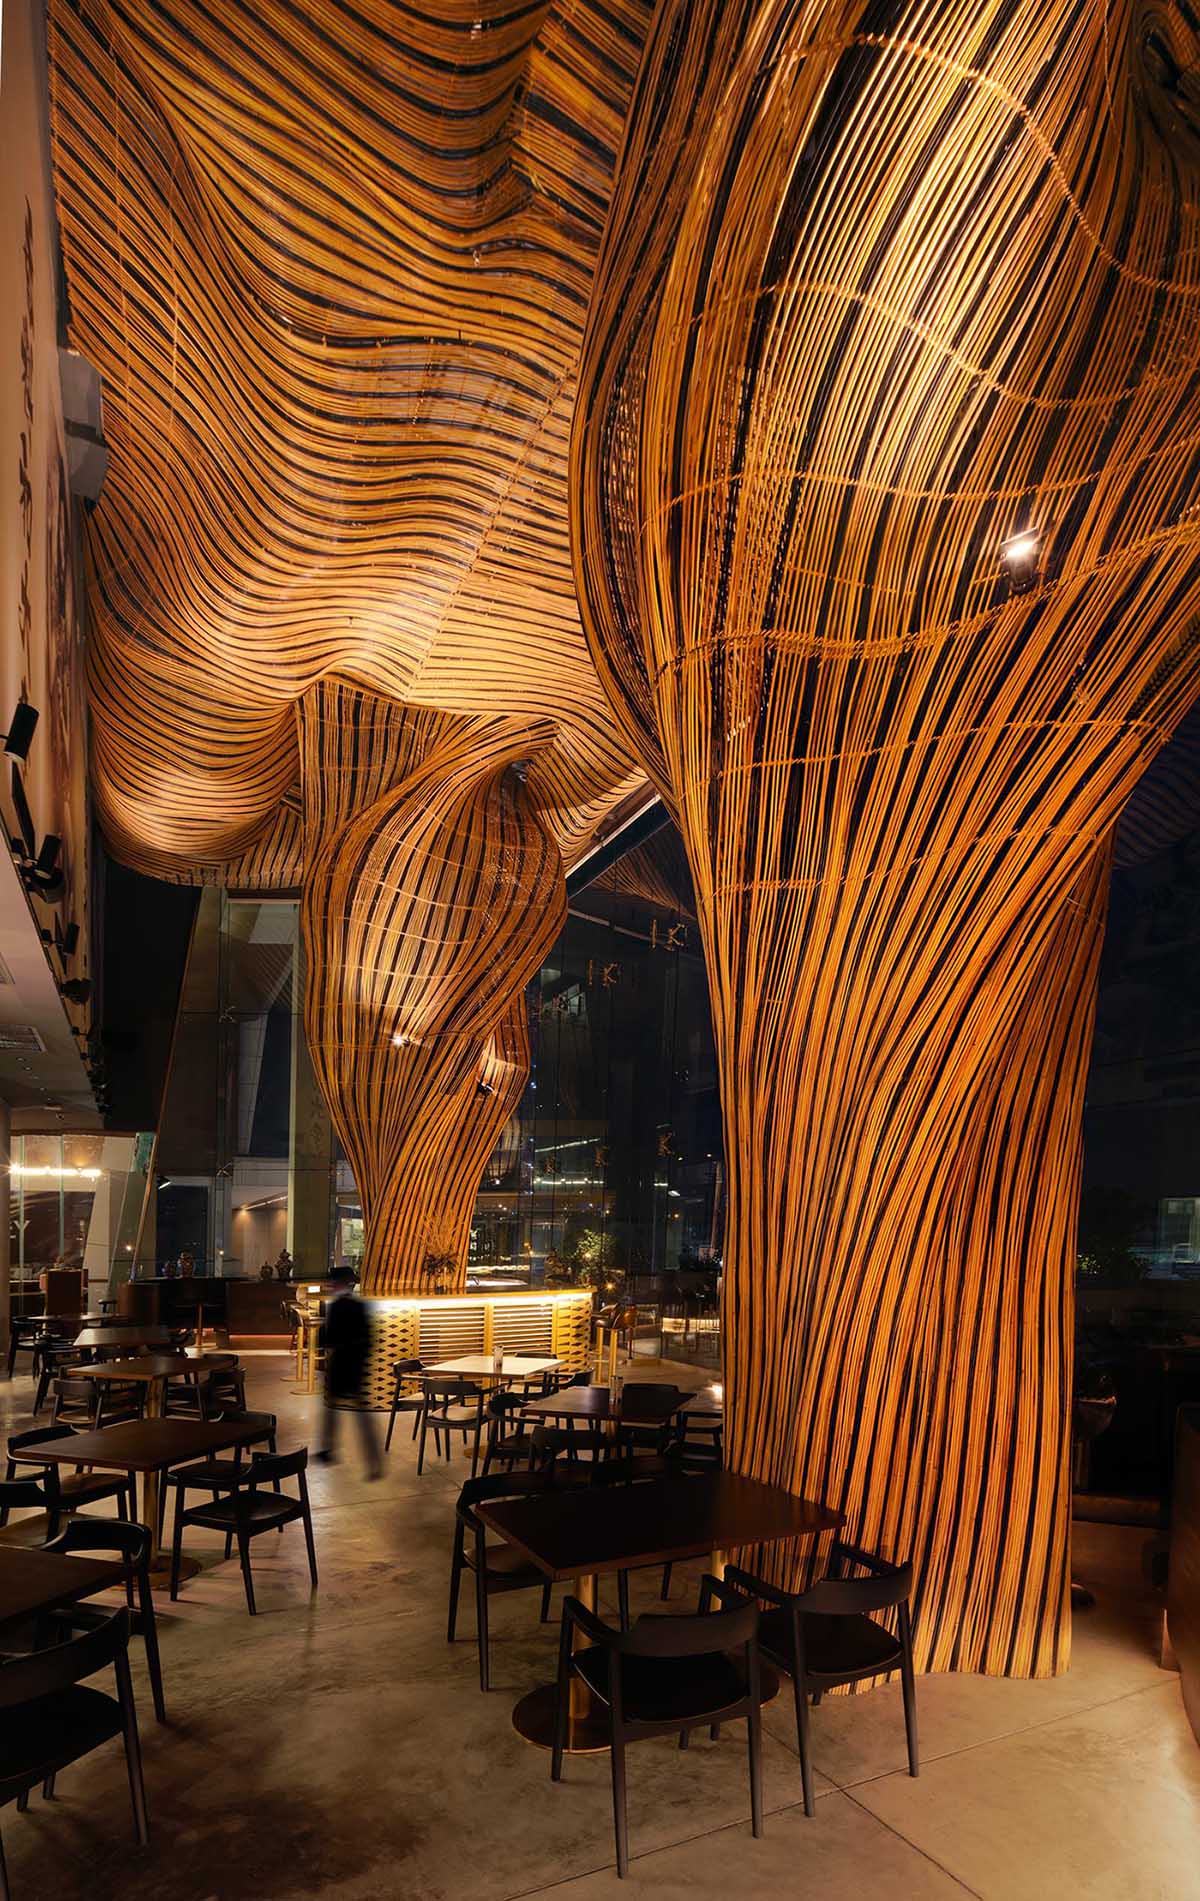 A modern restaurant with a glass facade that showcases flowing rattan sculptures inside.